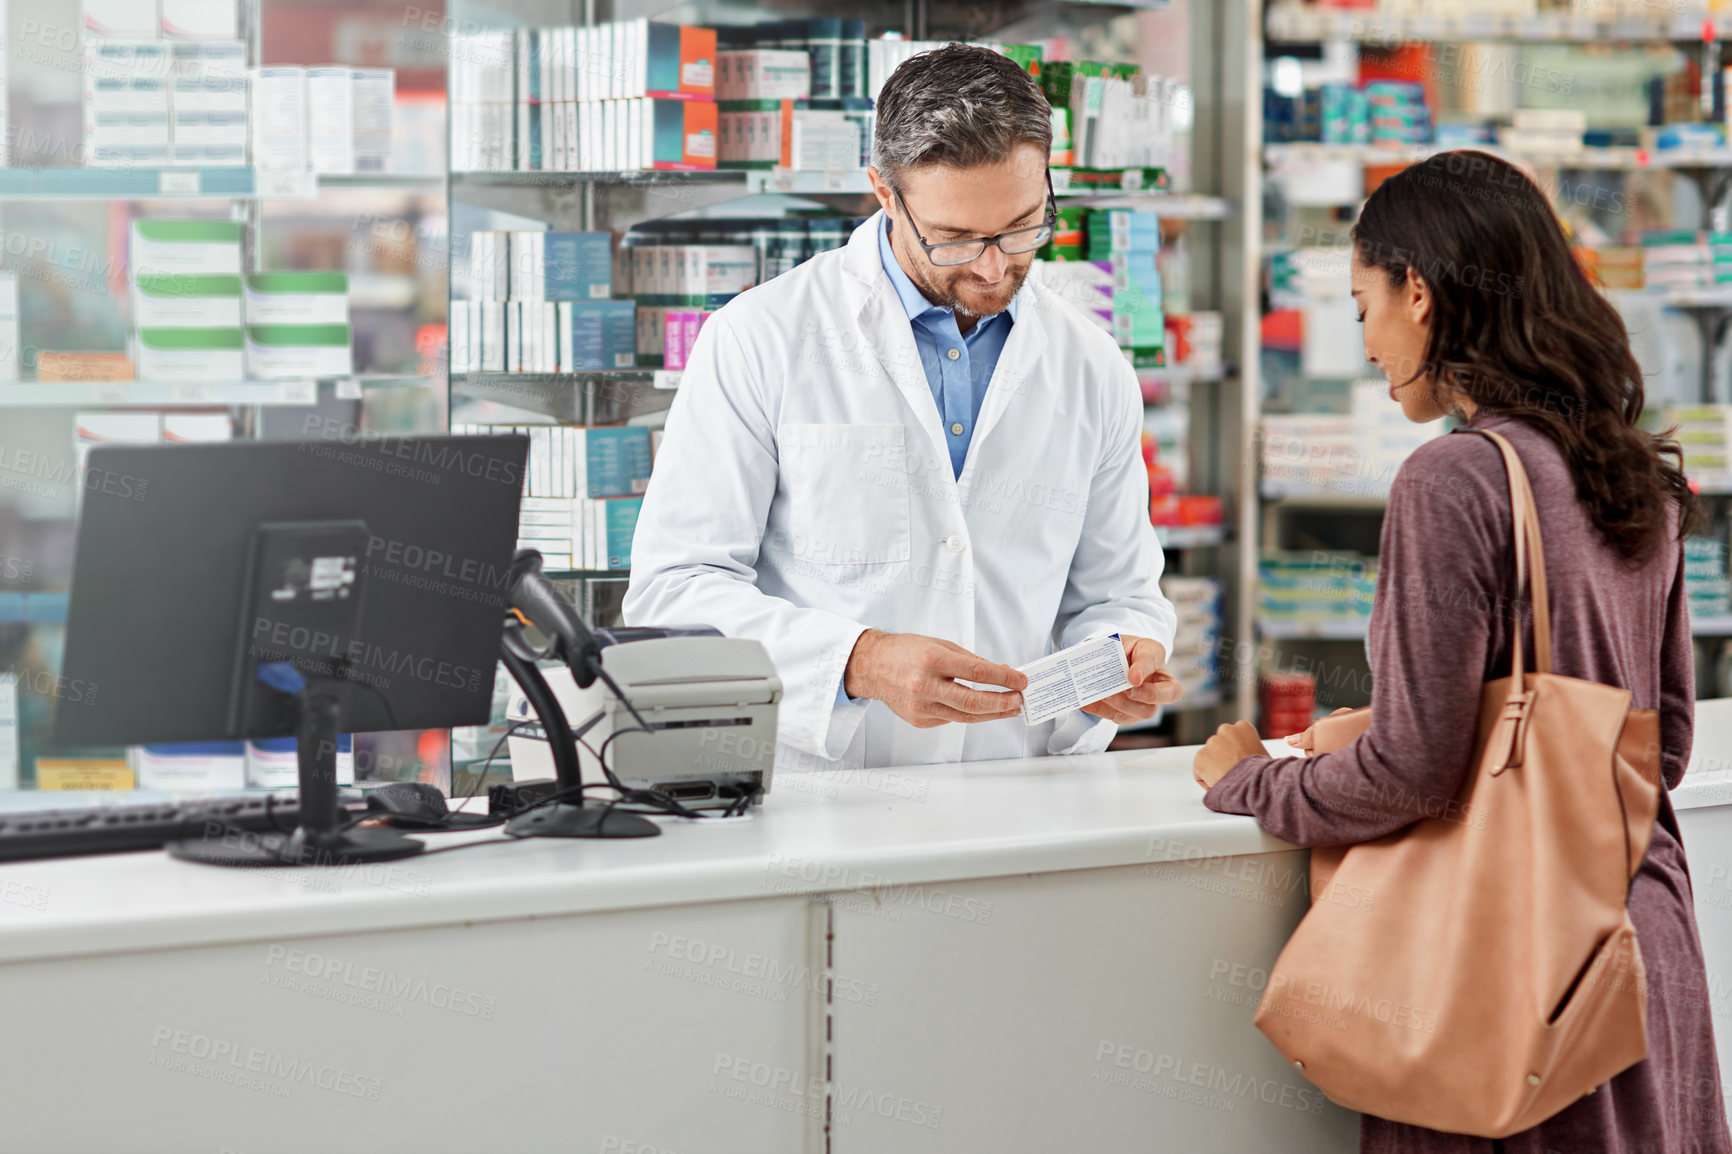 Buy stock photo Medicine, service and help of pharmacist consulting at  health store counter with expert knowledge. Medication advice and trust of girl with kind worker checking information at pharmacy.